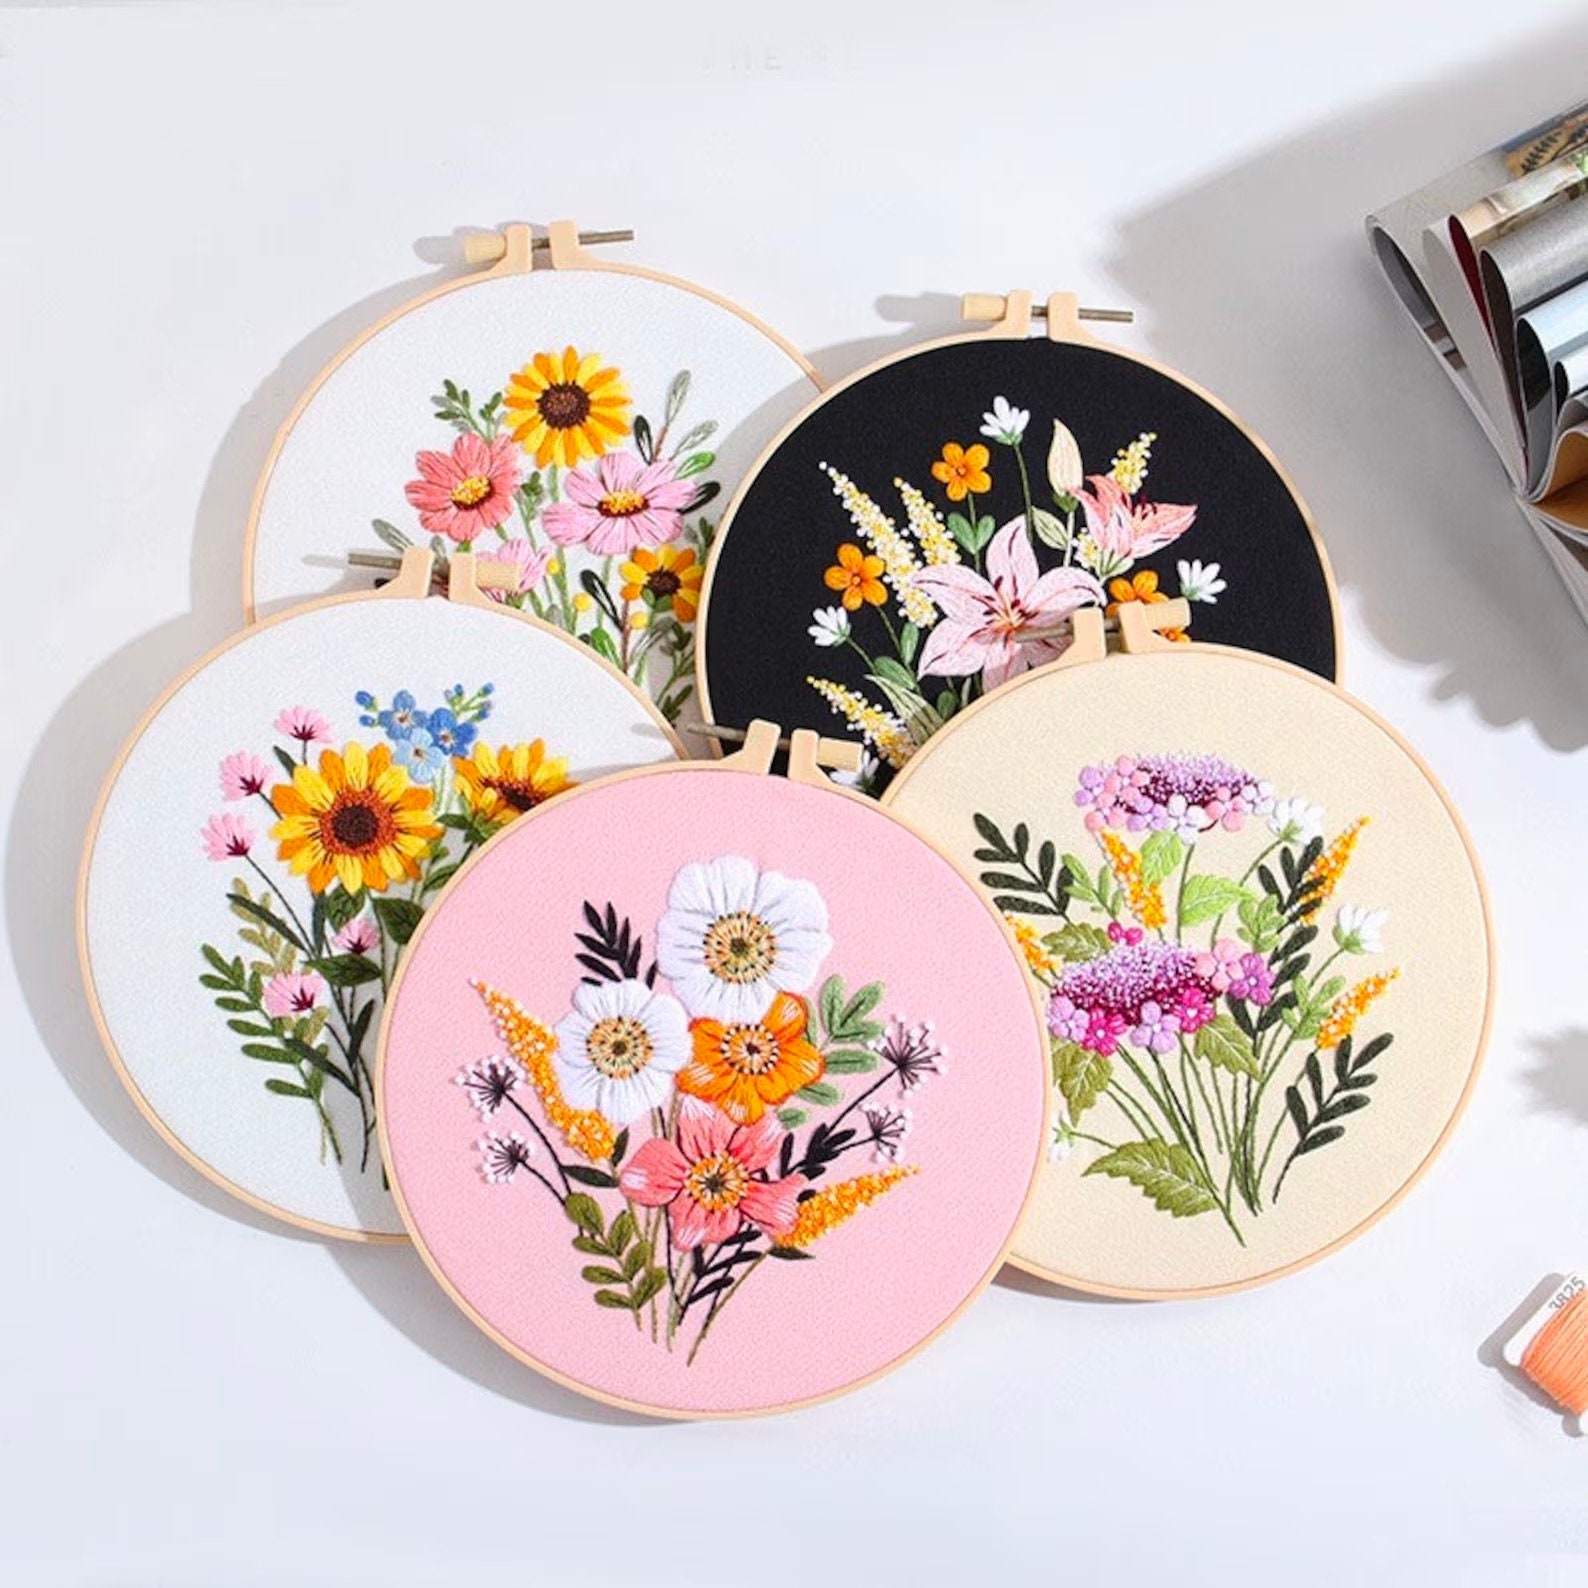 Embroidery Kit for Beginners Adults, Floral Plant Pattern,Cross Stitch Kits Set,DIY Embroidery Starter Kits,Easy for The Embroidery Beginners to Learn